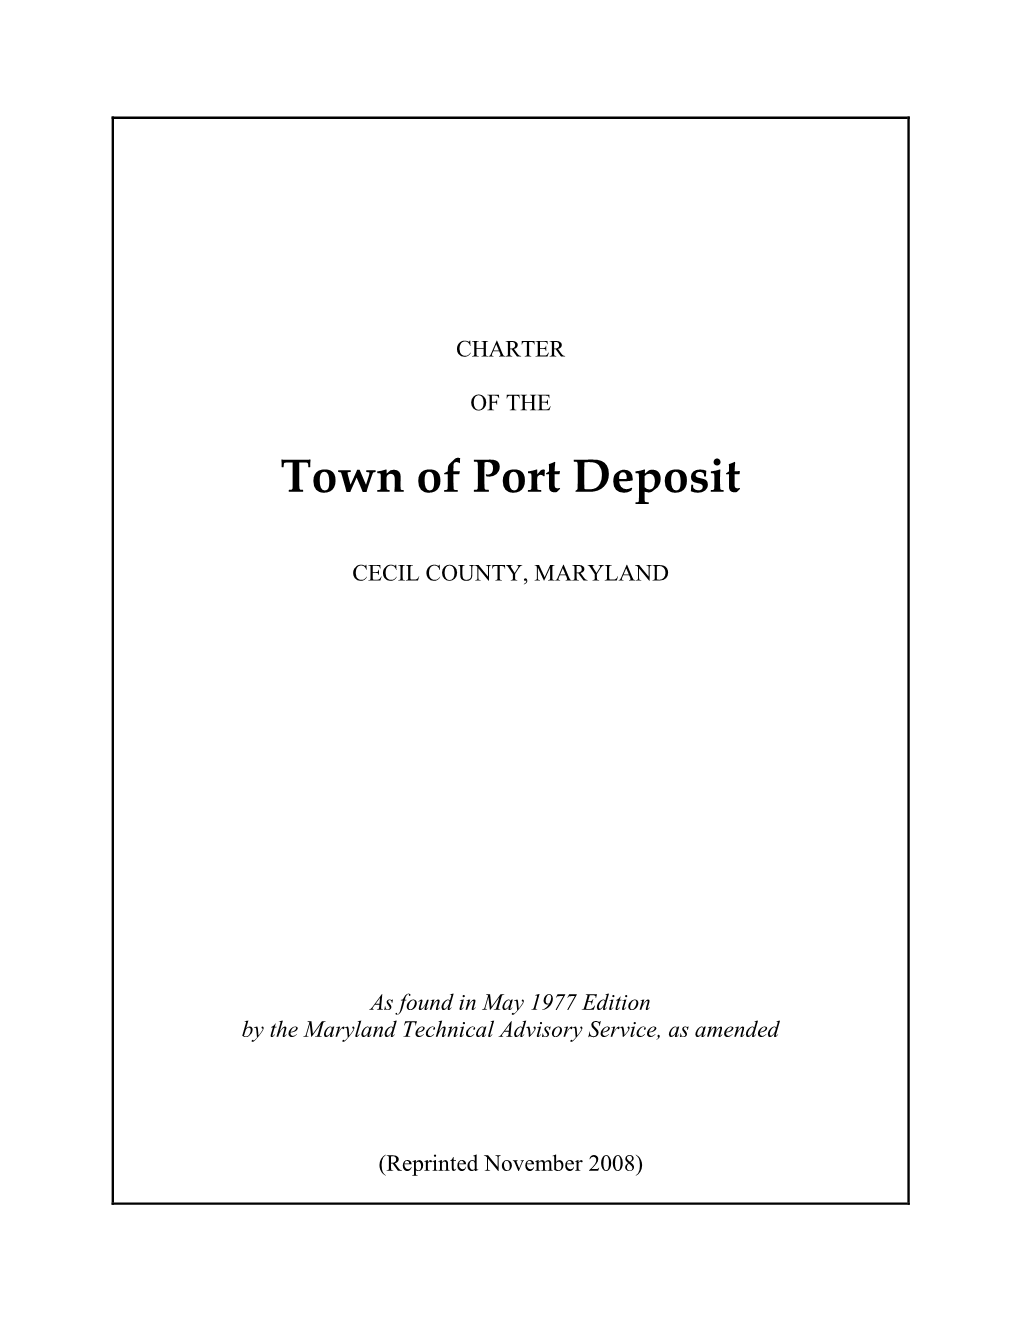 Charter of the Town of Port Deposit 116 – Iii